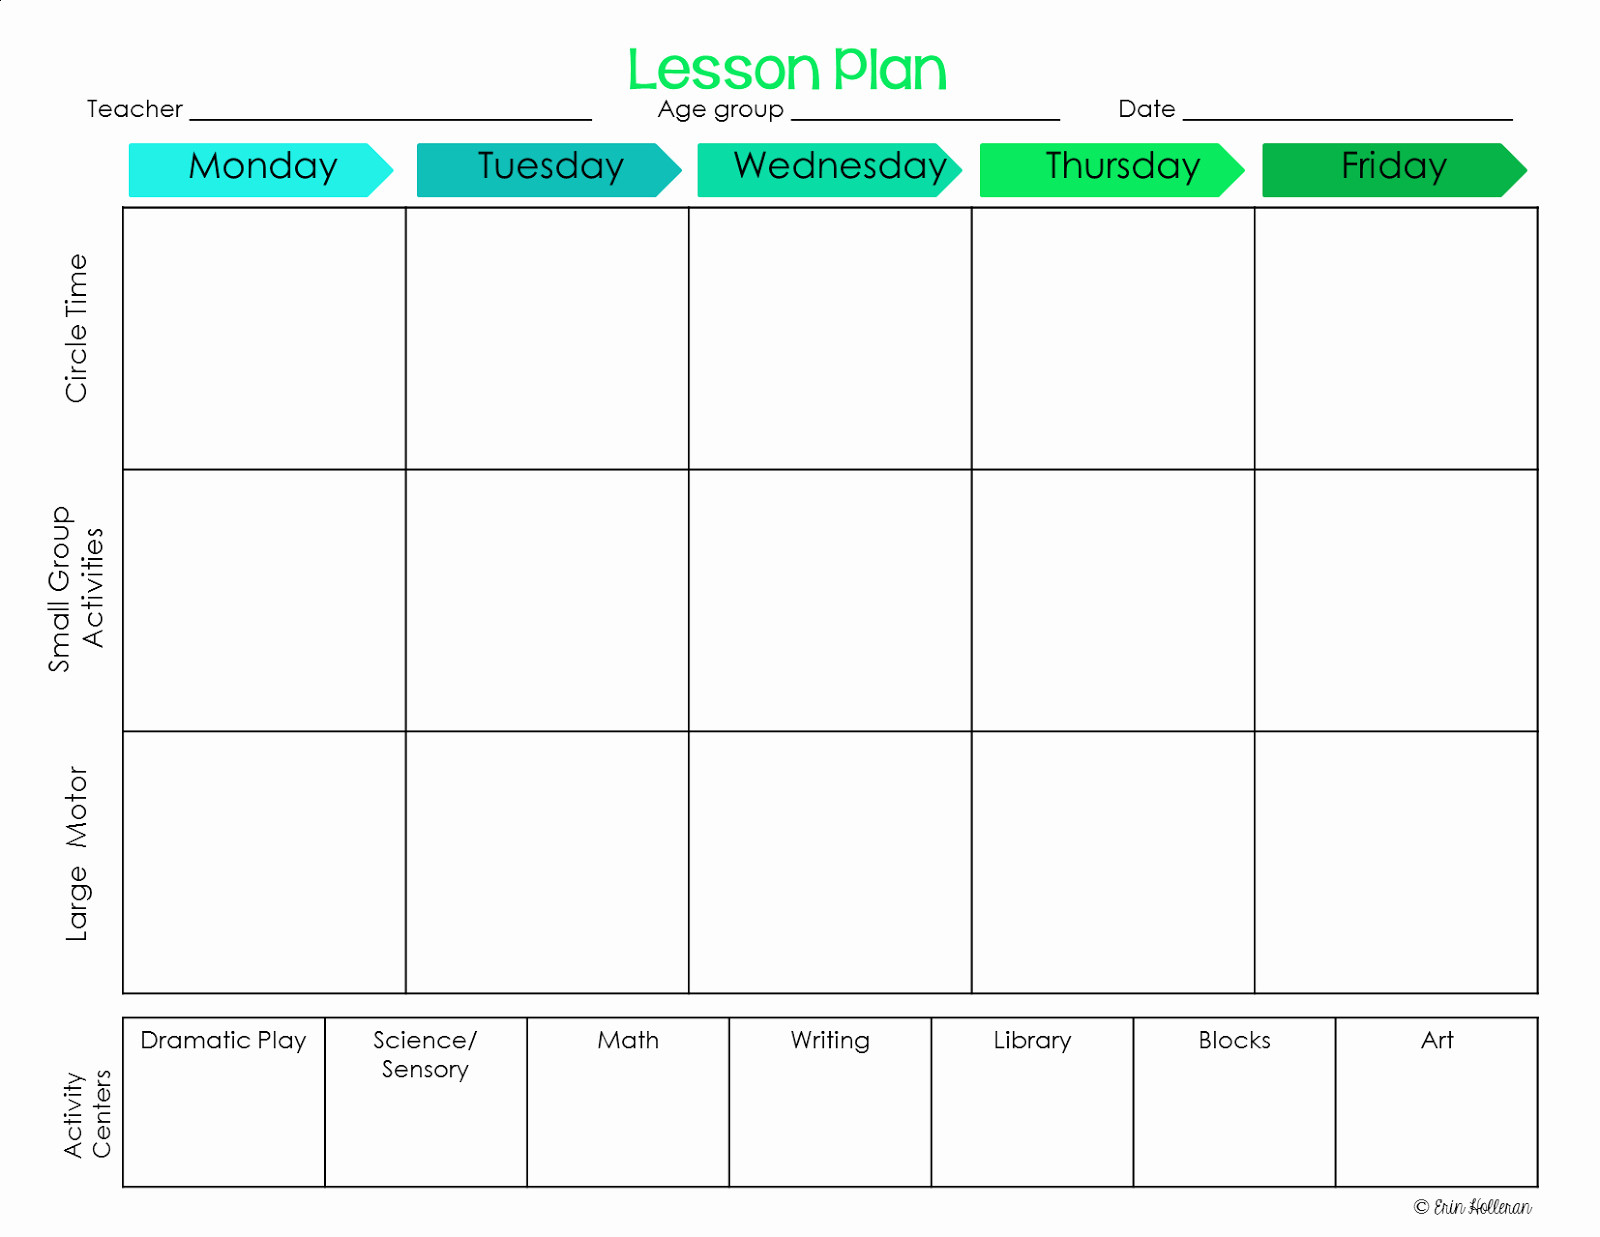 Daily Lesson Plan Template 005 Preschool Weekly Lesson Plan Template Free Ideas with